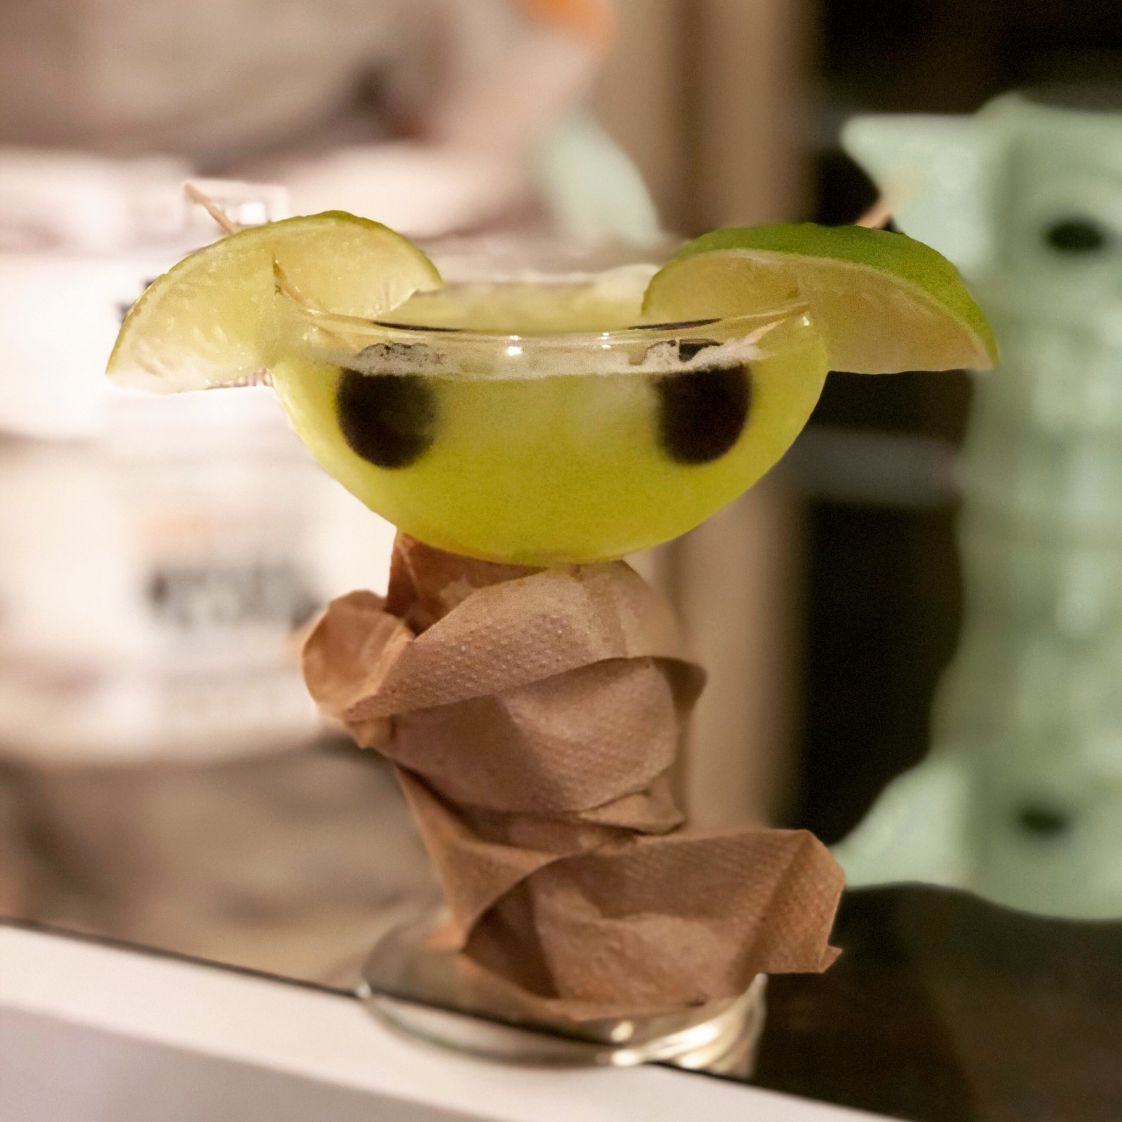 The Disney+ hit series The Mandalorian has inspired us all in different ways. I saw a lot of people posting Baby Yoda-themed cocktails. Some were tequila-based; some used various colorful liqueurs to achieve the desired 